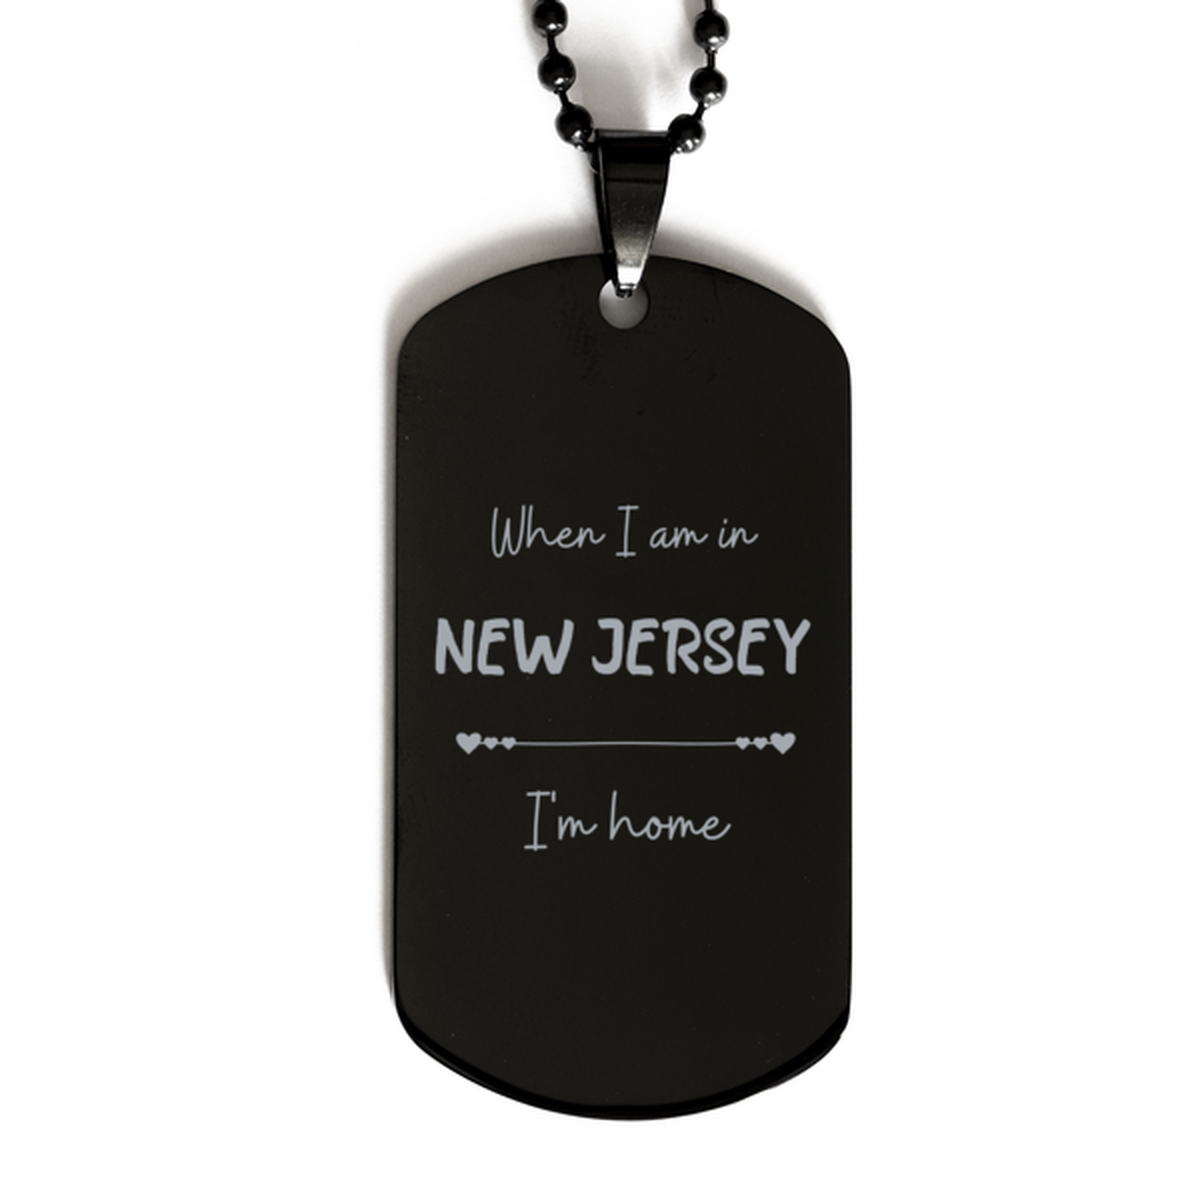 When I am in New Jersey I'm home Black Dog Tag, Cheap Gifts For New Jersey, State New Jersey Birthday Gifts for Friends Coworker